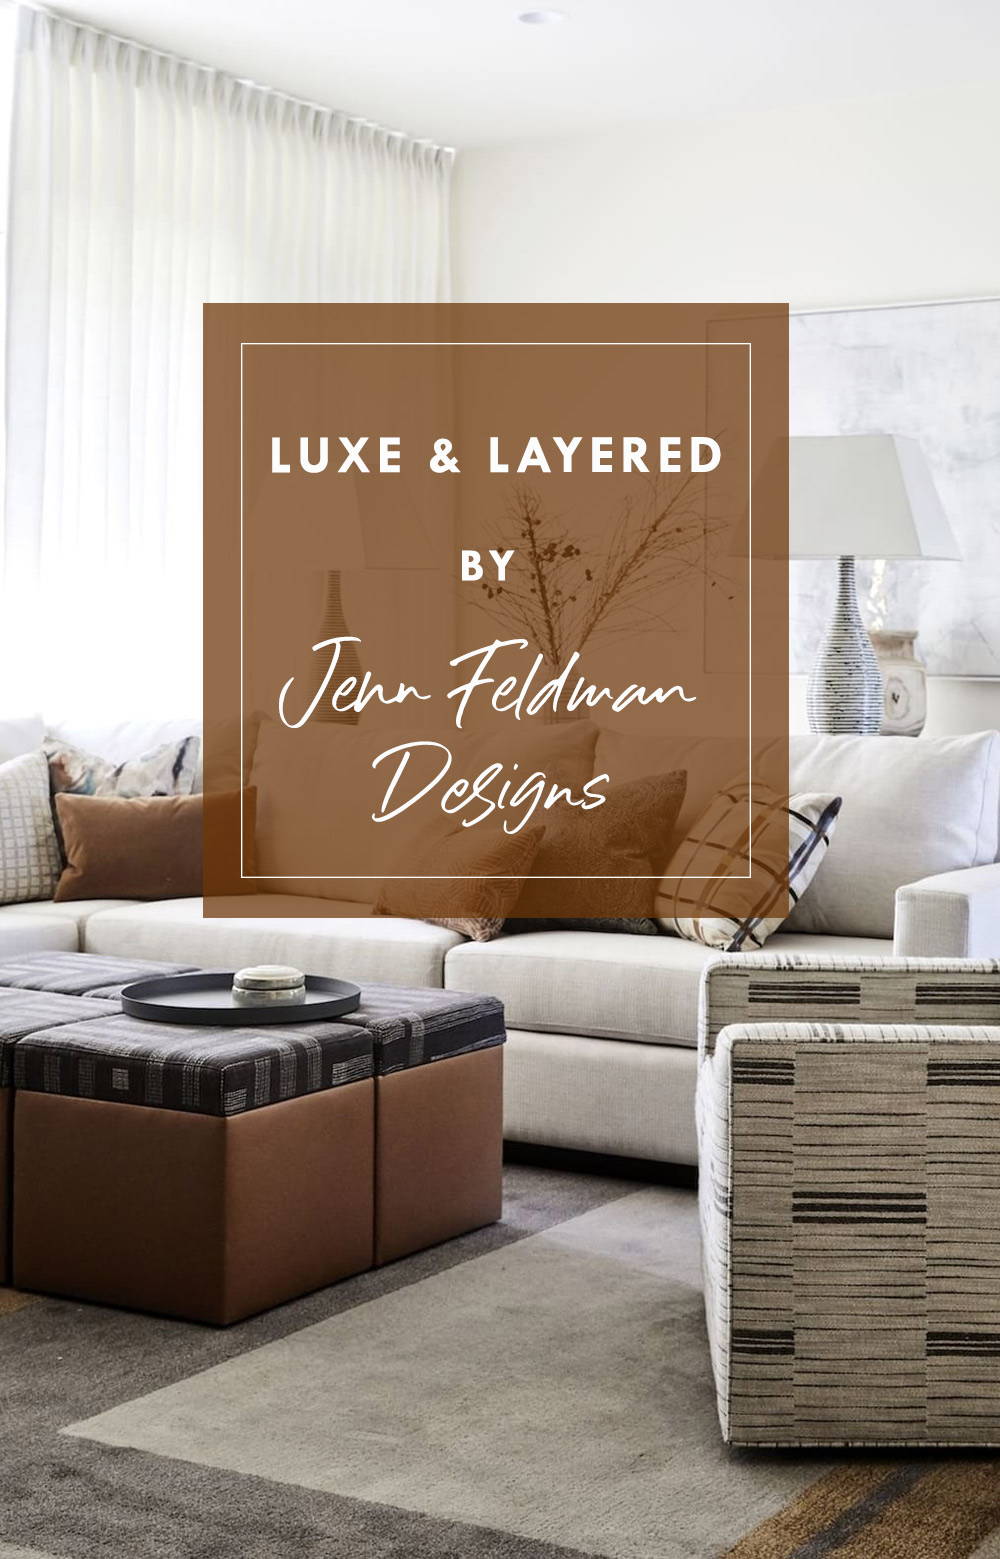 How to get the luxe and layered interior design look by Jenn Feldman Designs